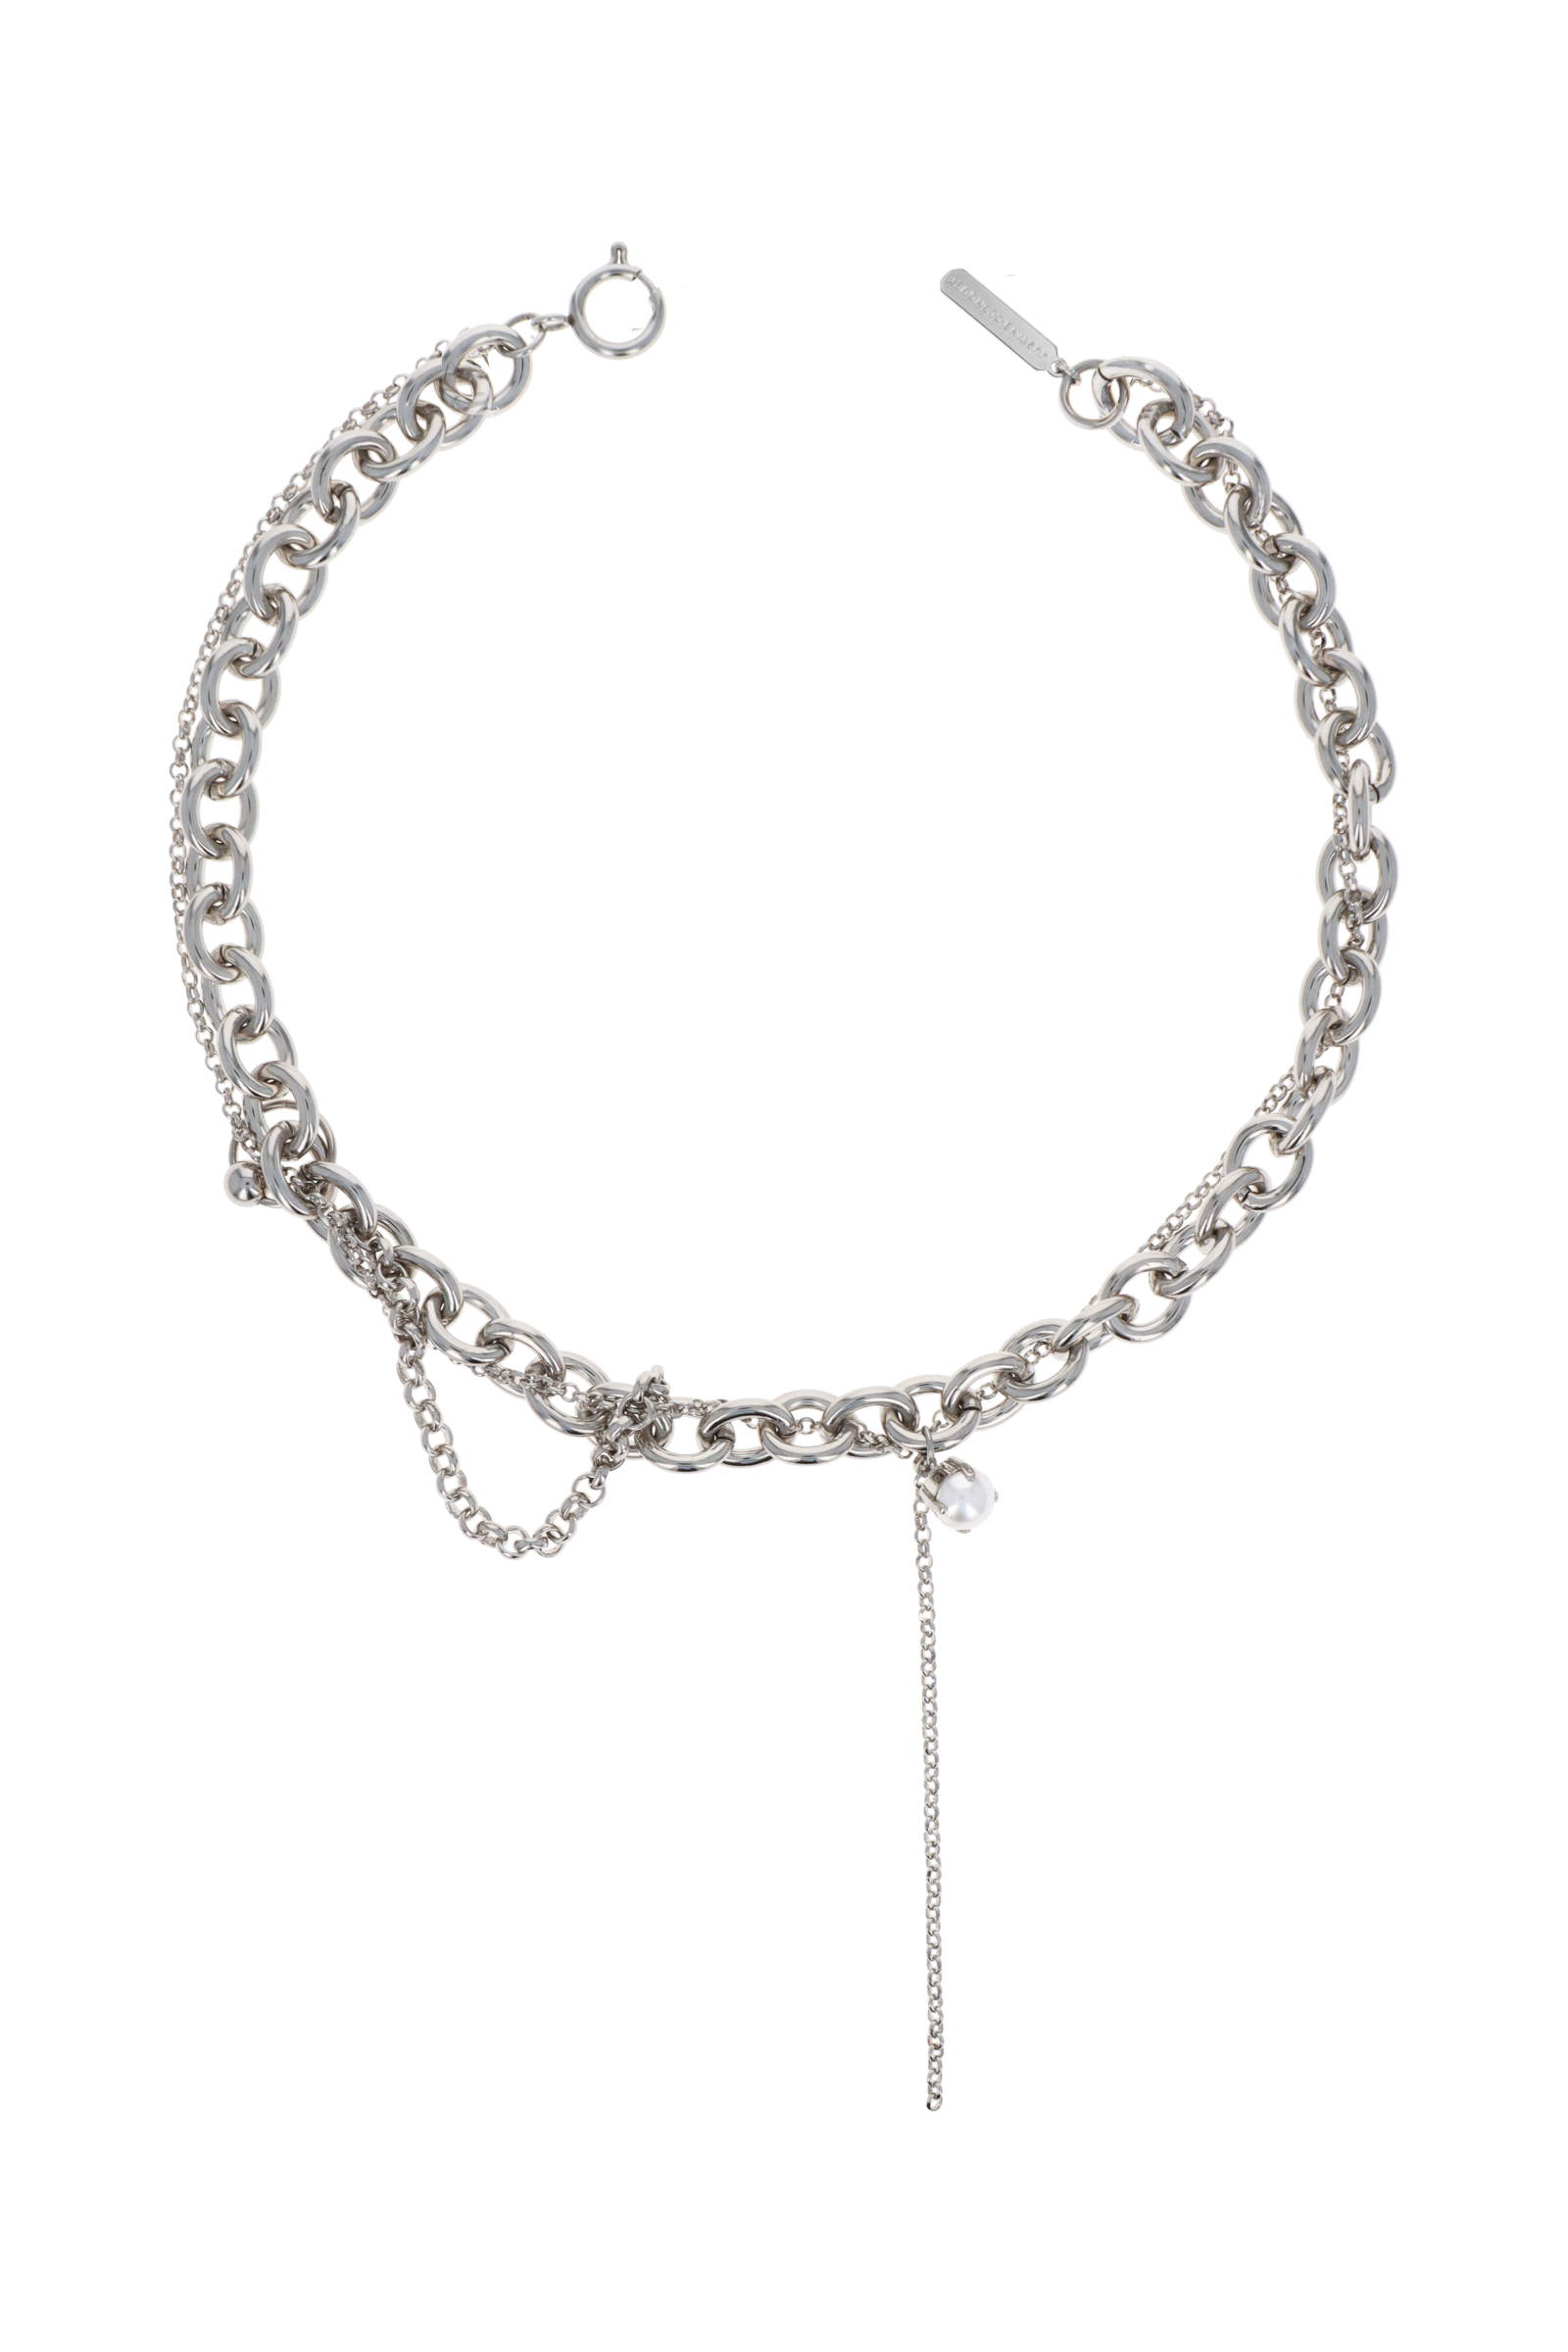 Justine Clenquet Lucy Necklace